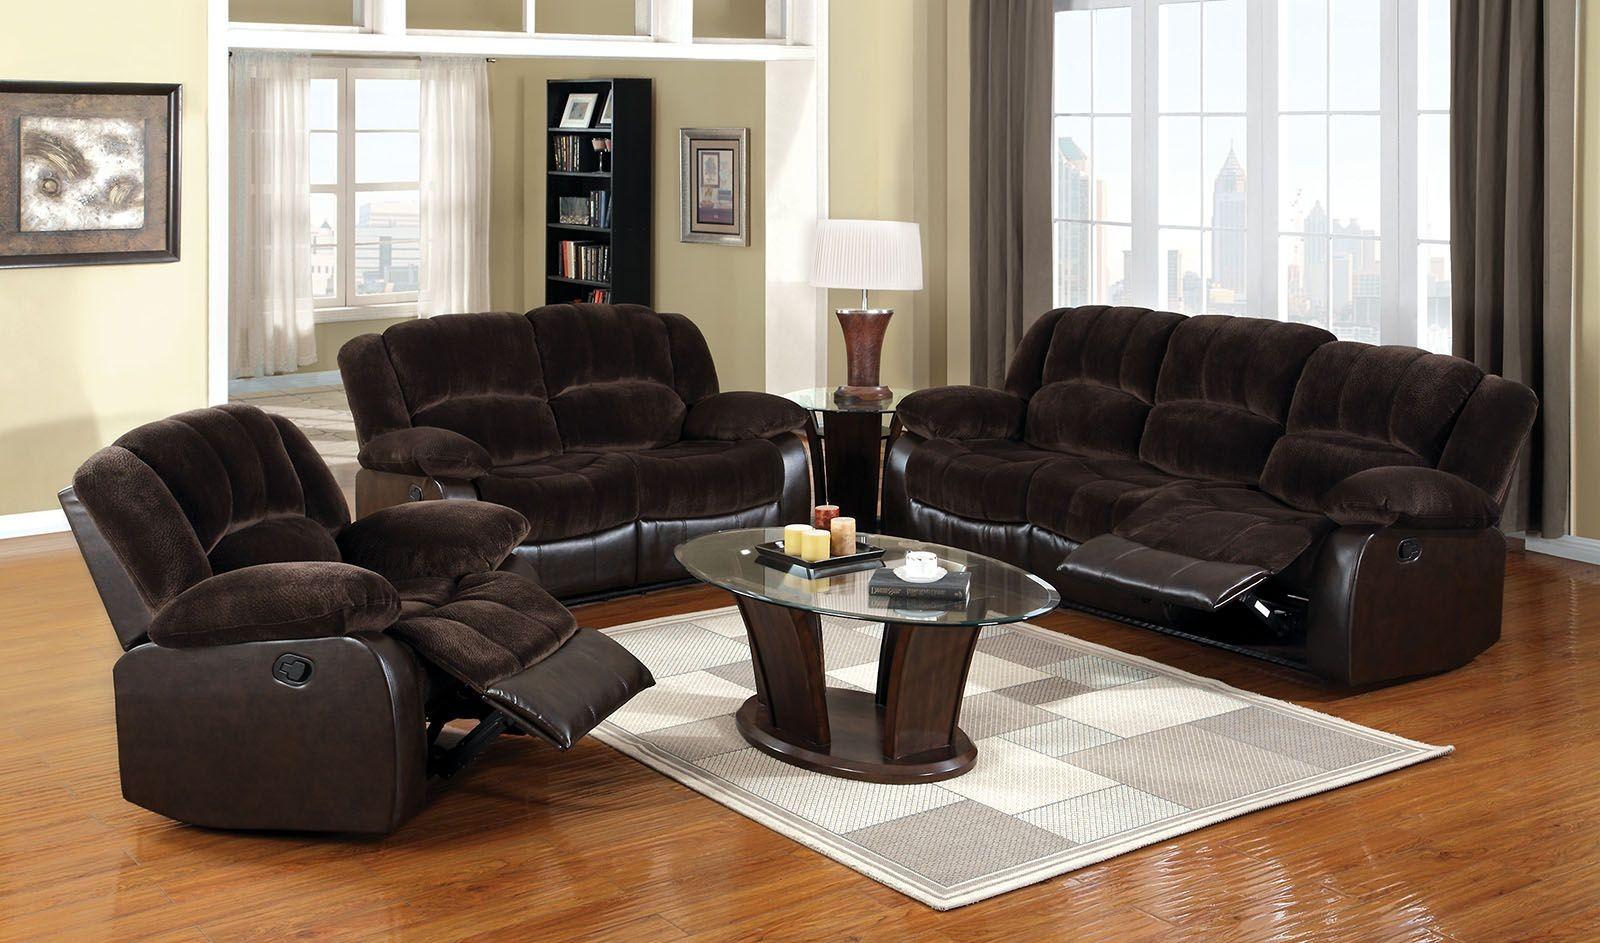 Rustic Living Room Sets
 Winslow Rustic Brown Reclining Living Room Set from